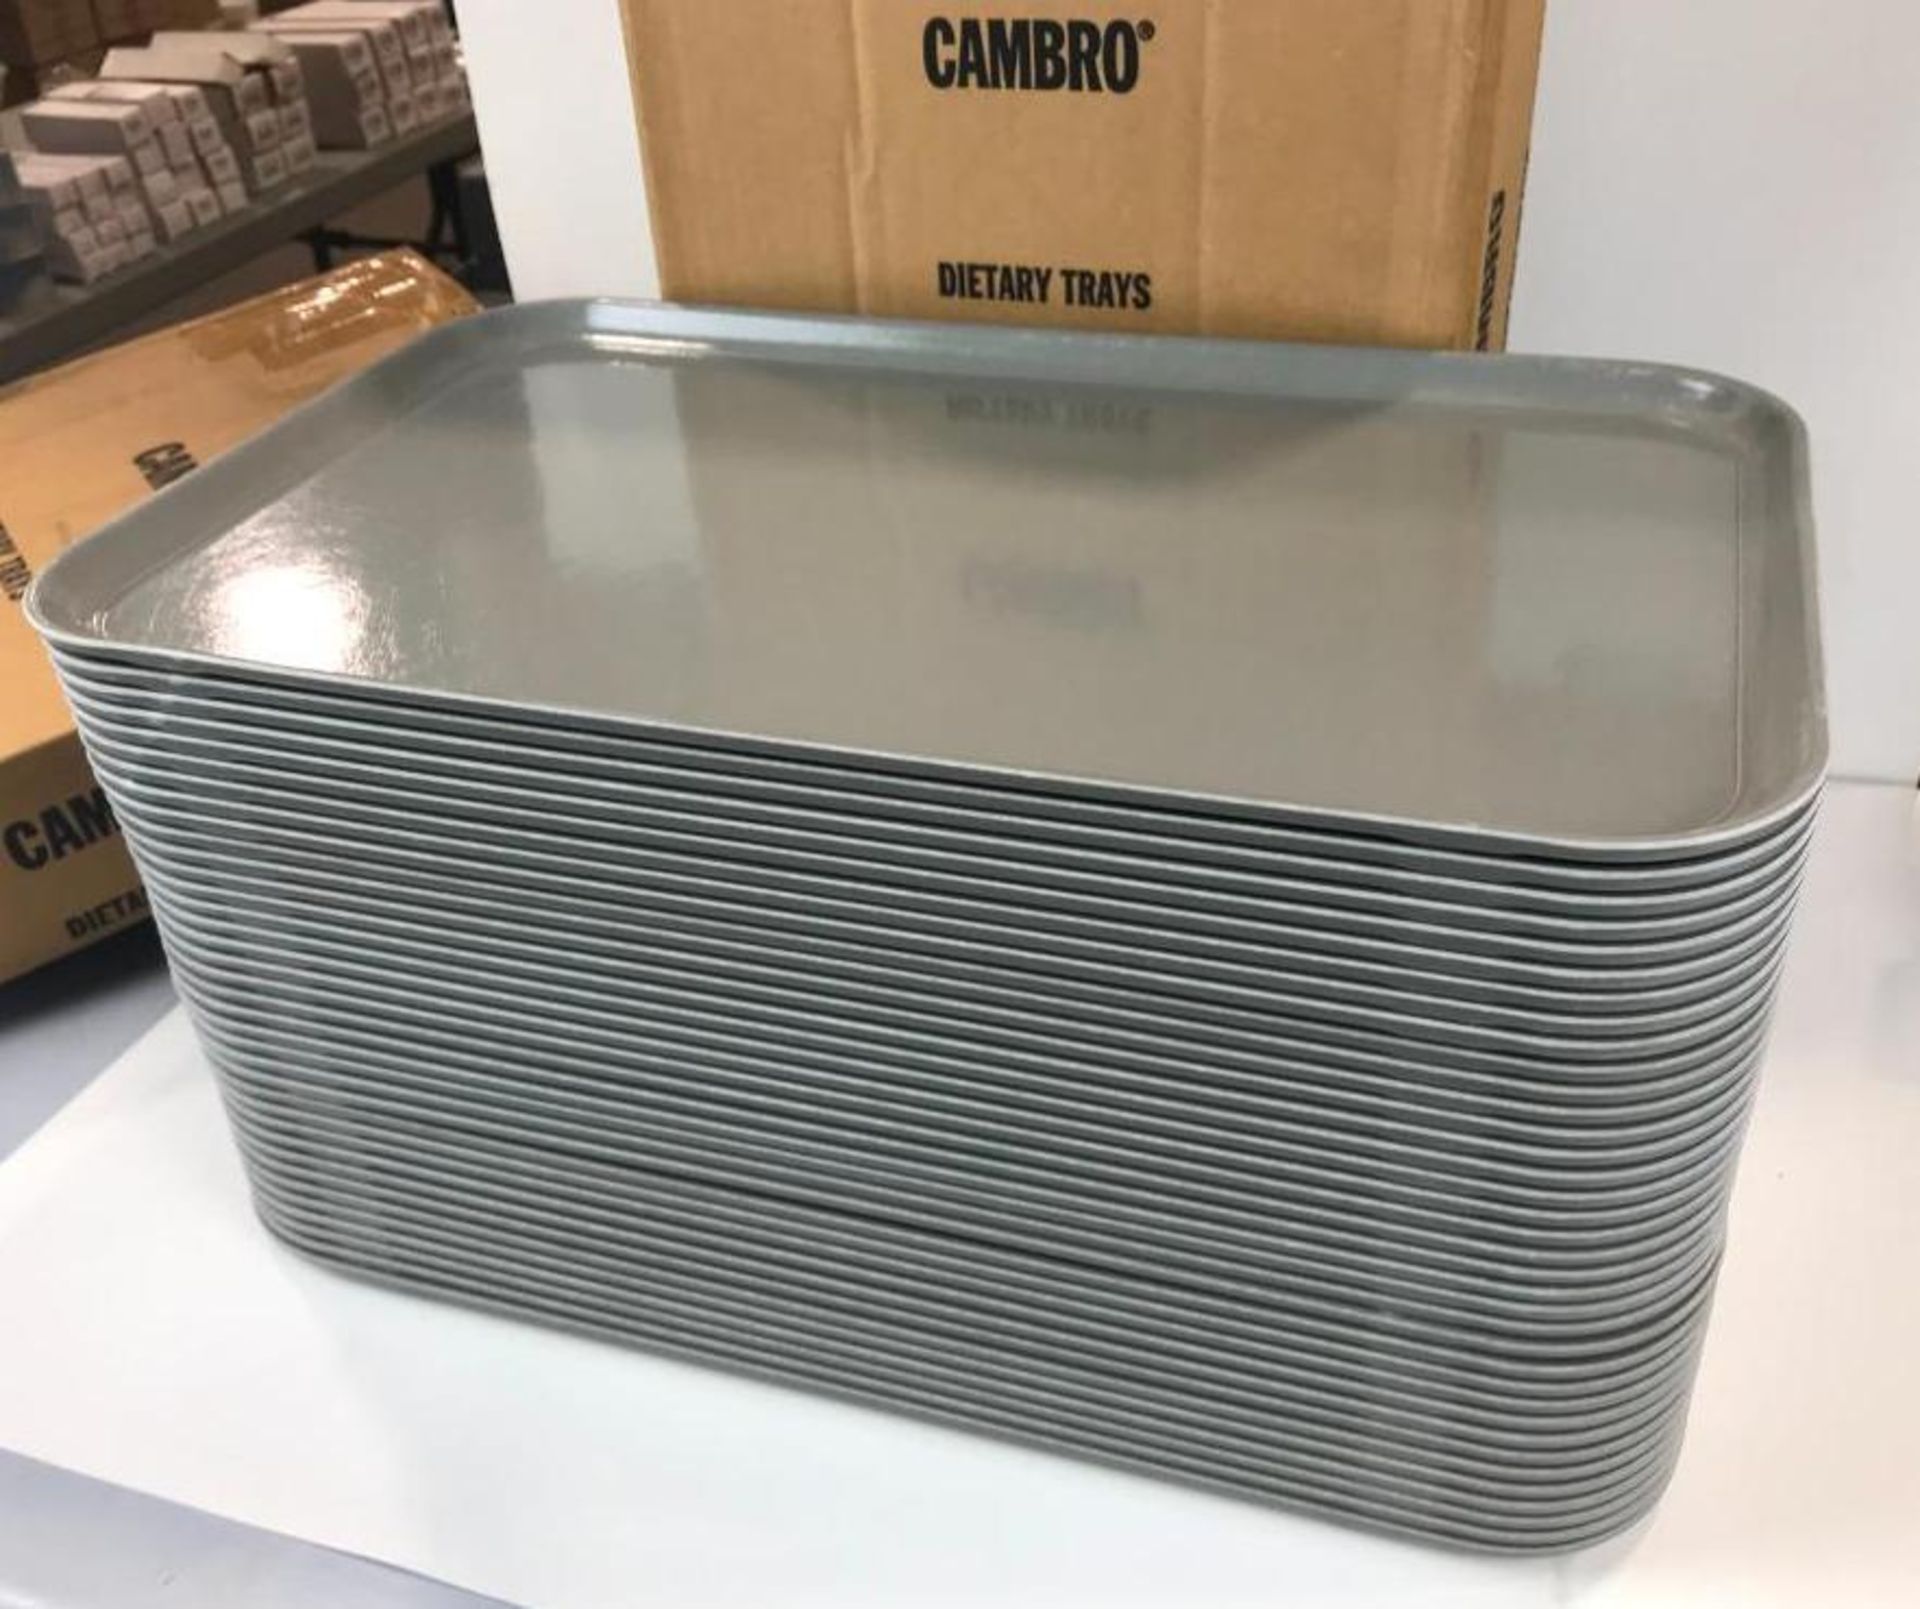 CAMBRO 1220D107 12" x 20" PEARL GRAY DIETARY TRAY - LOT OF 36 - Image 2 of 4